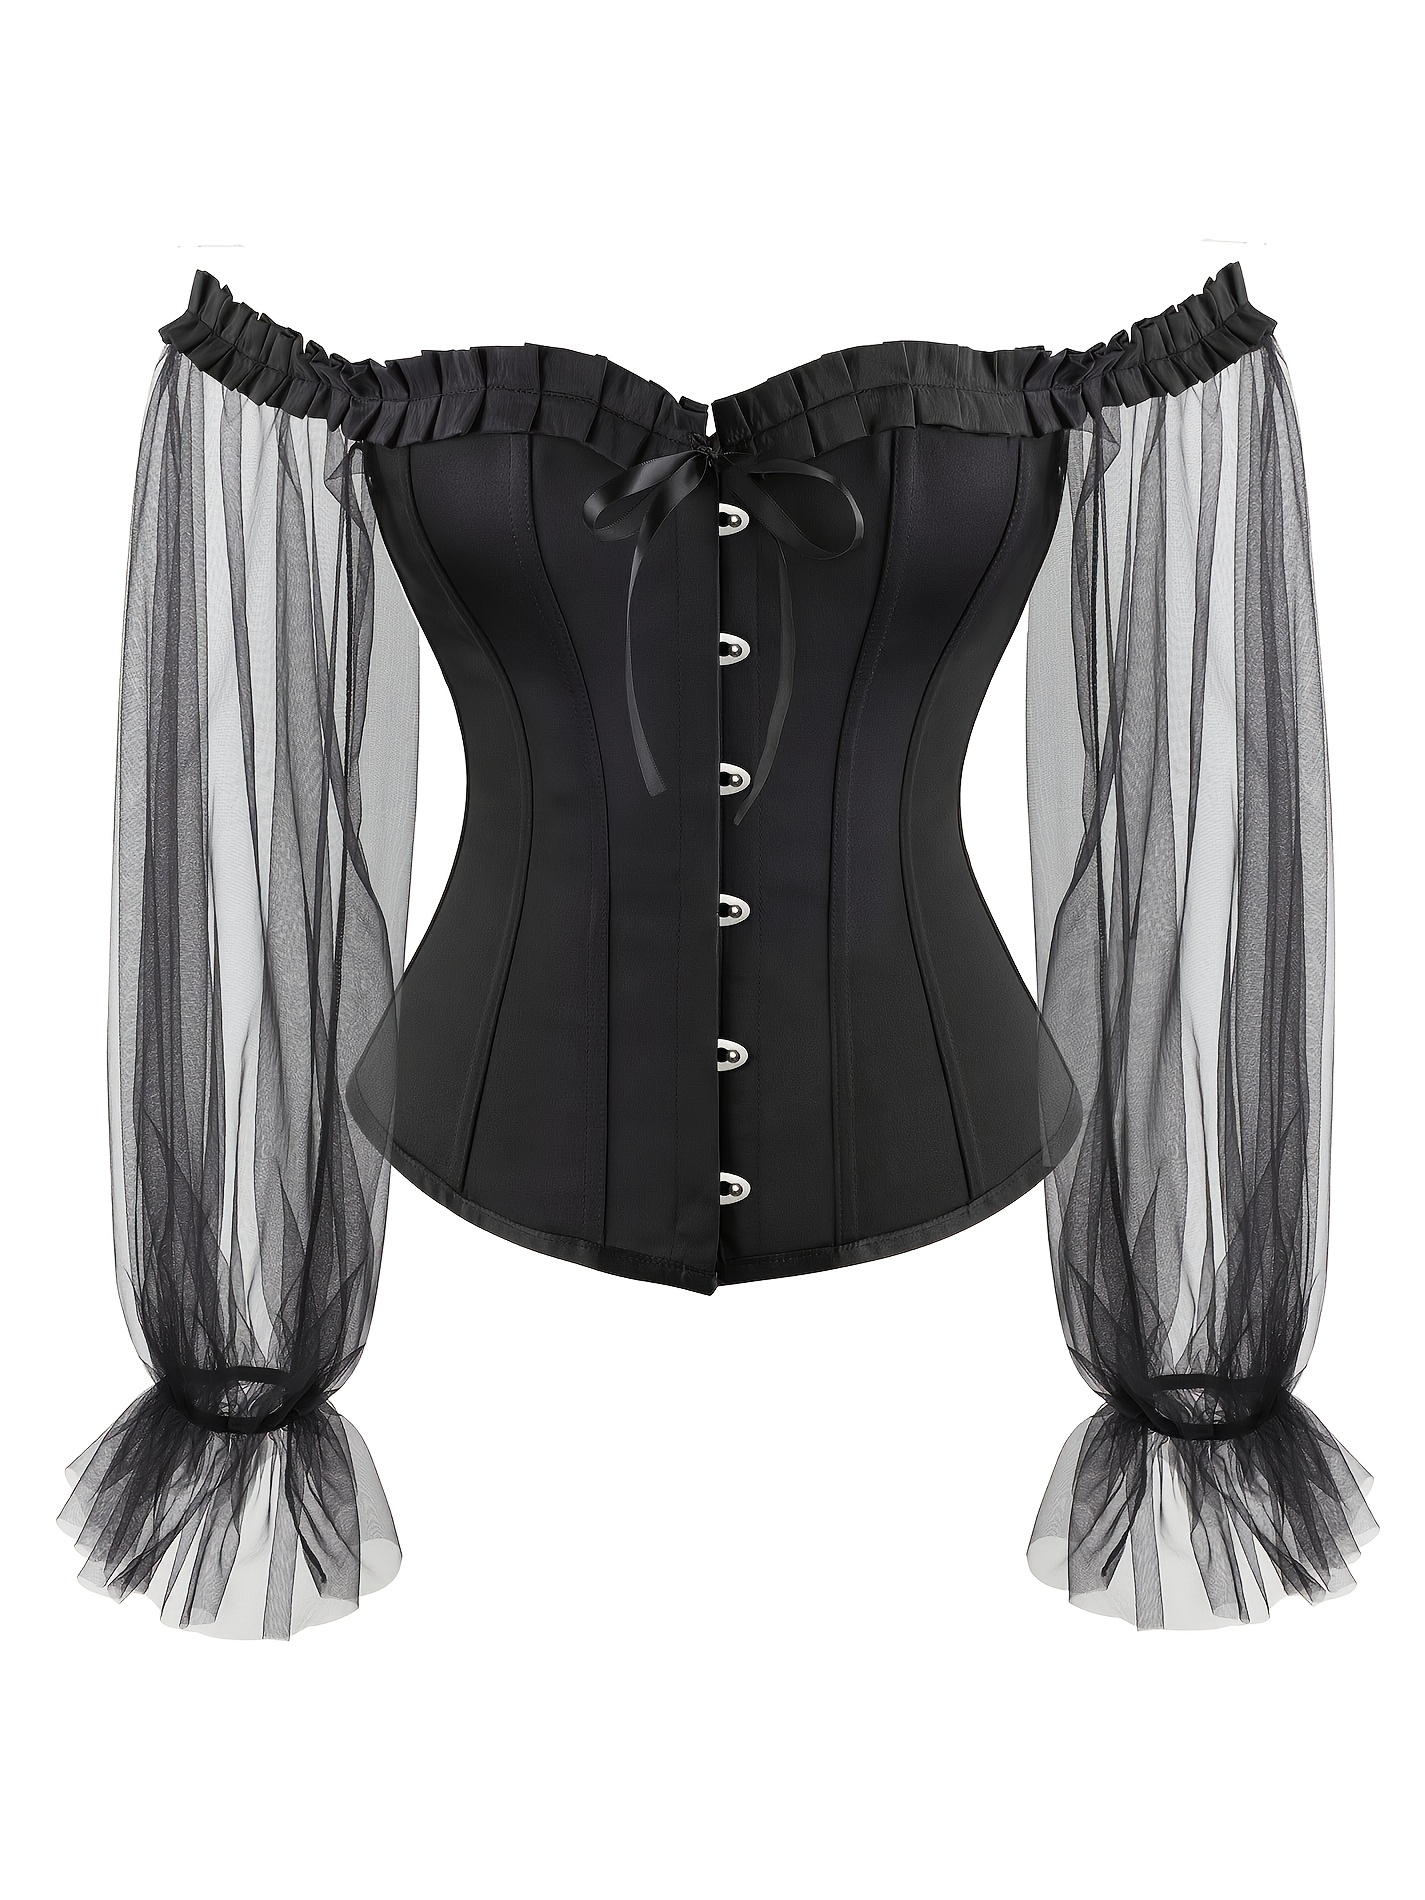 Women's Gothic Lace Up Boned Overbust Bustier Corset Top with Feather -  United Corsets